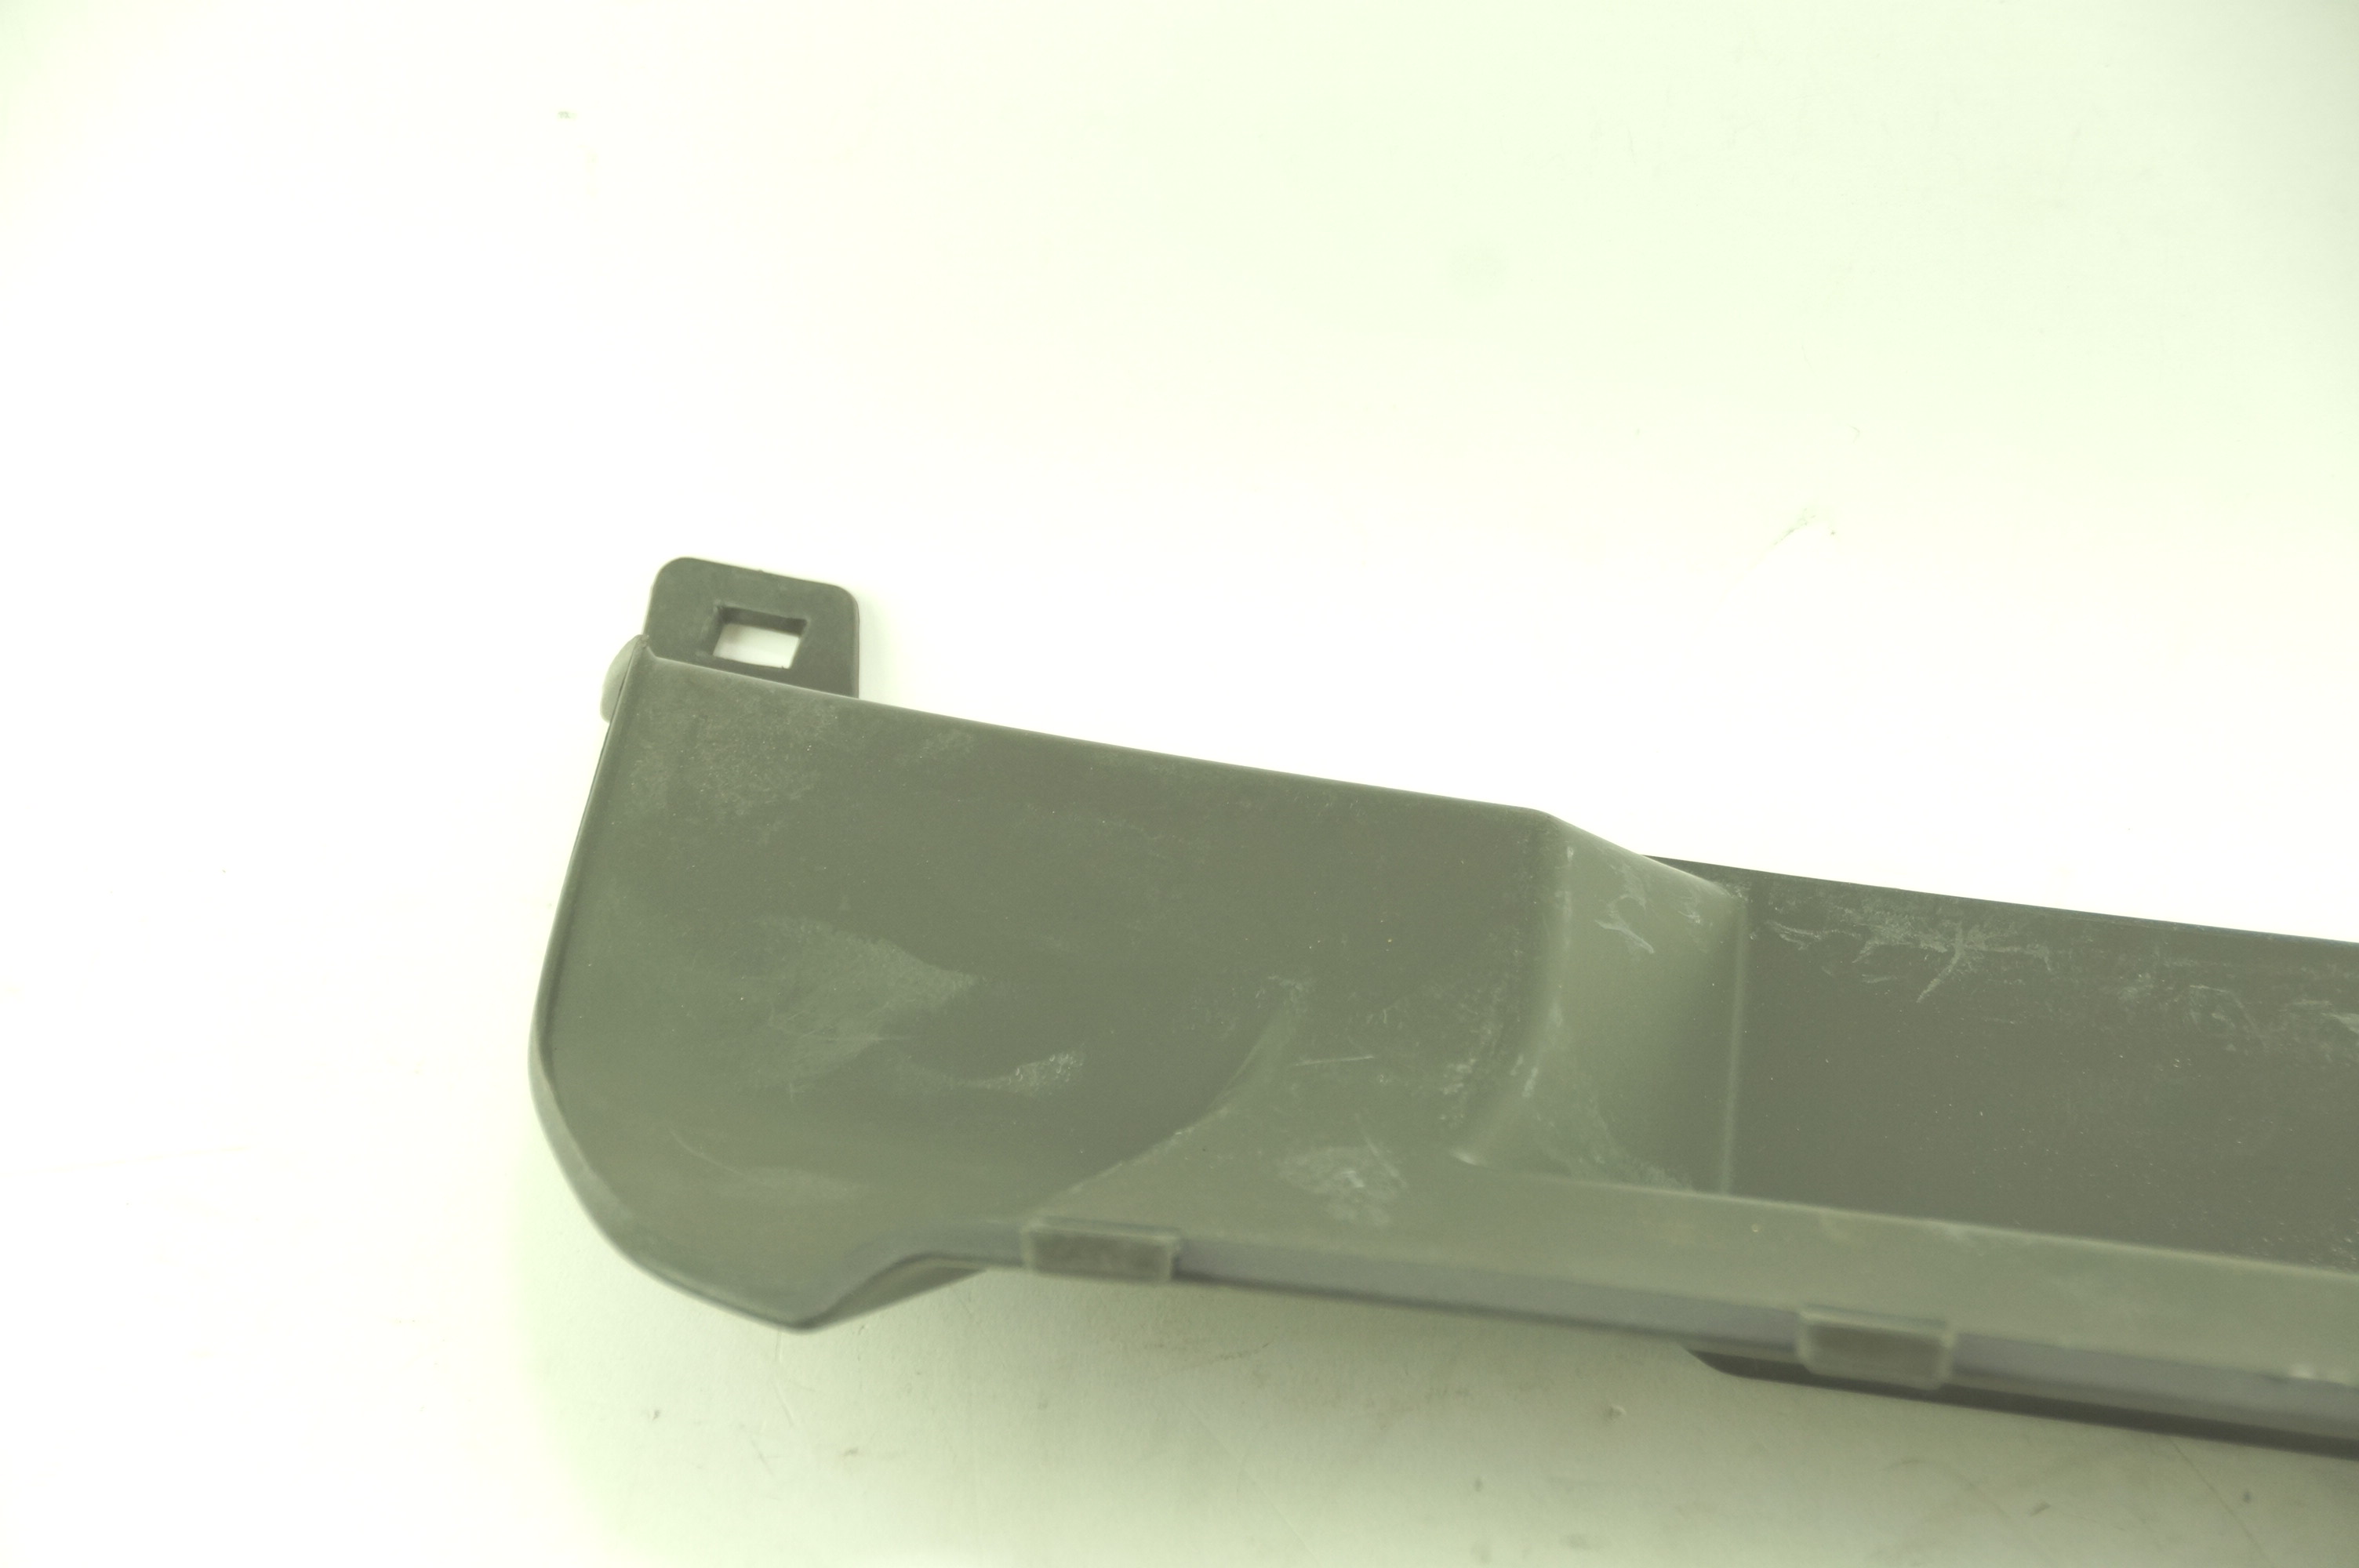 New Genuine OEM 15930191 GM Chevy Traverse Rear Bumper Hitch Cover 09-12 - image 6